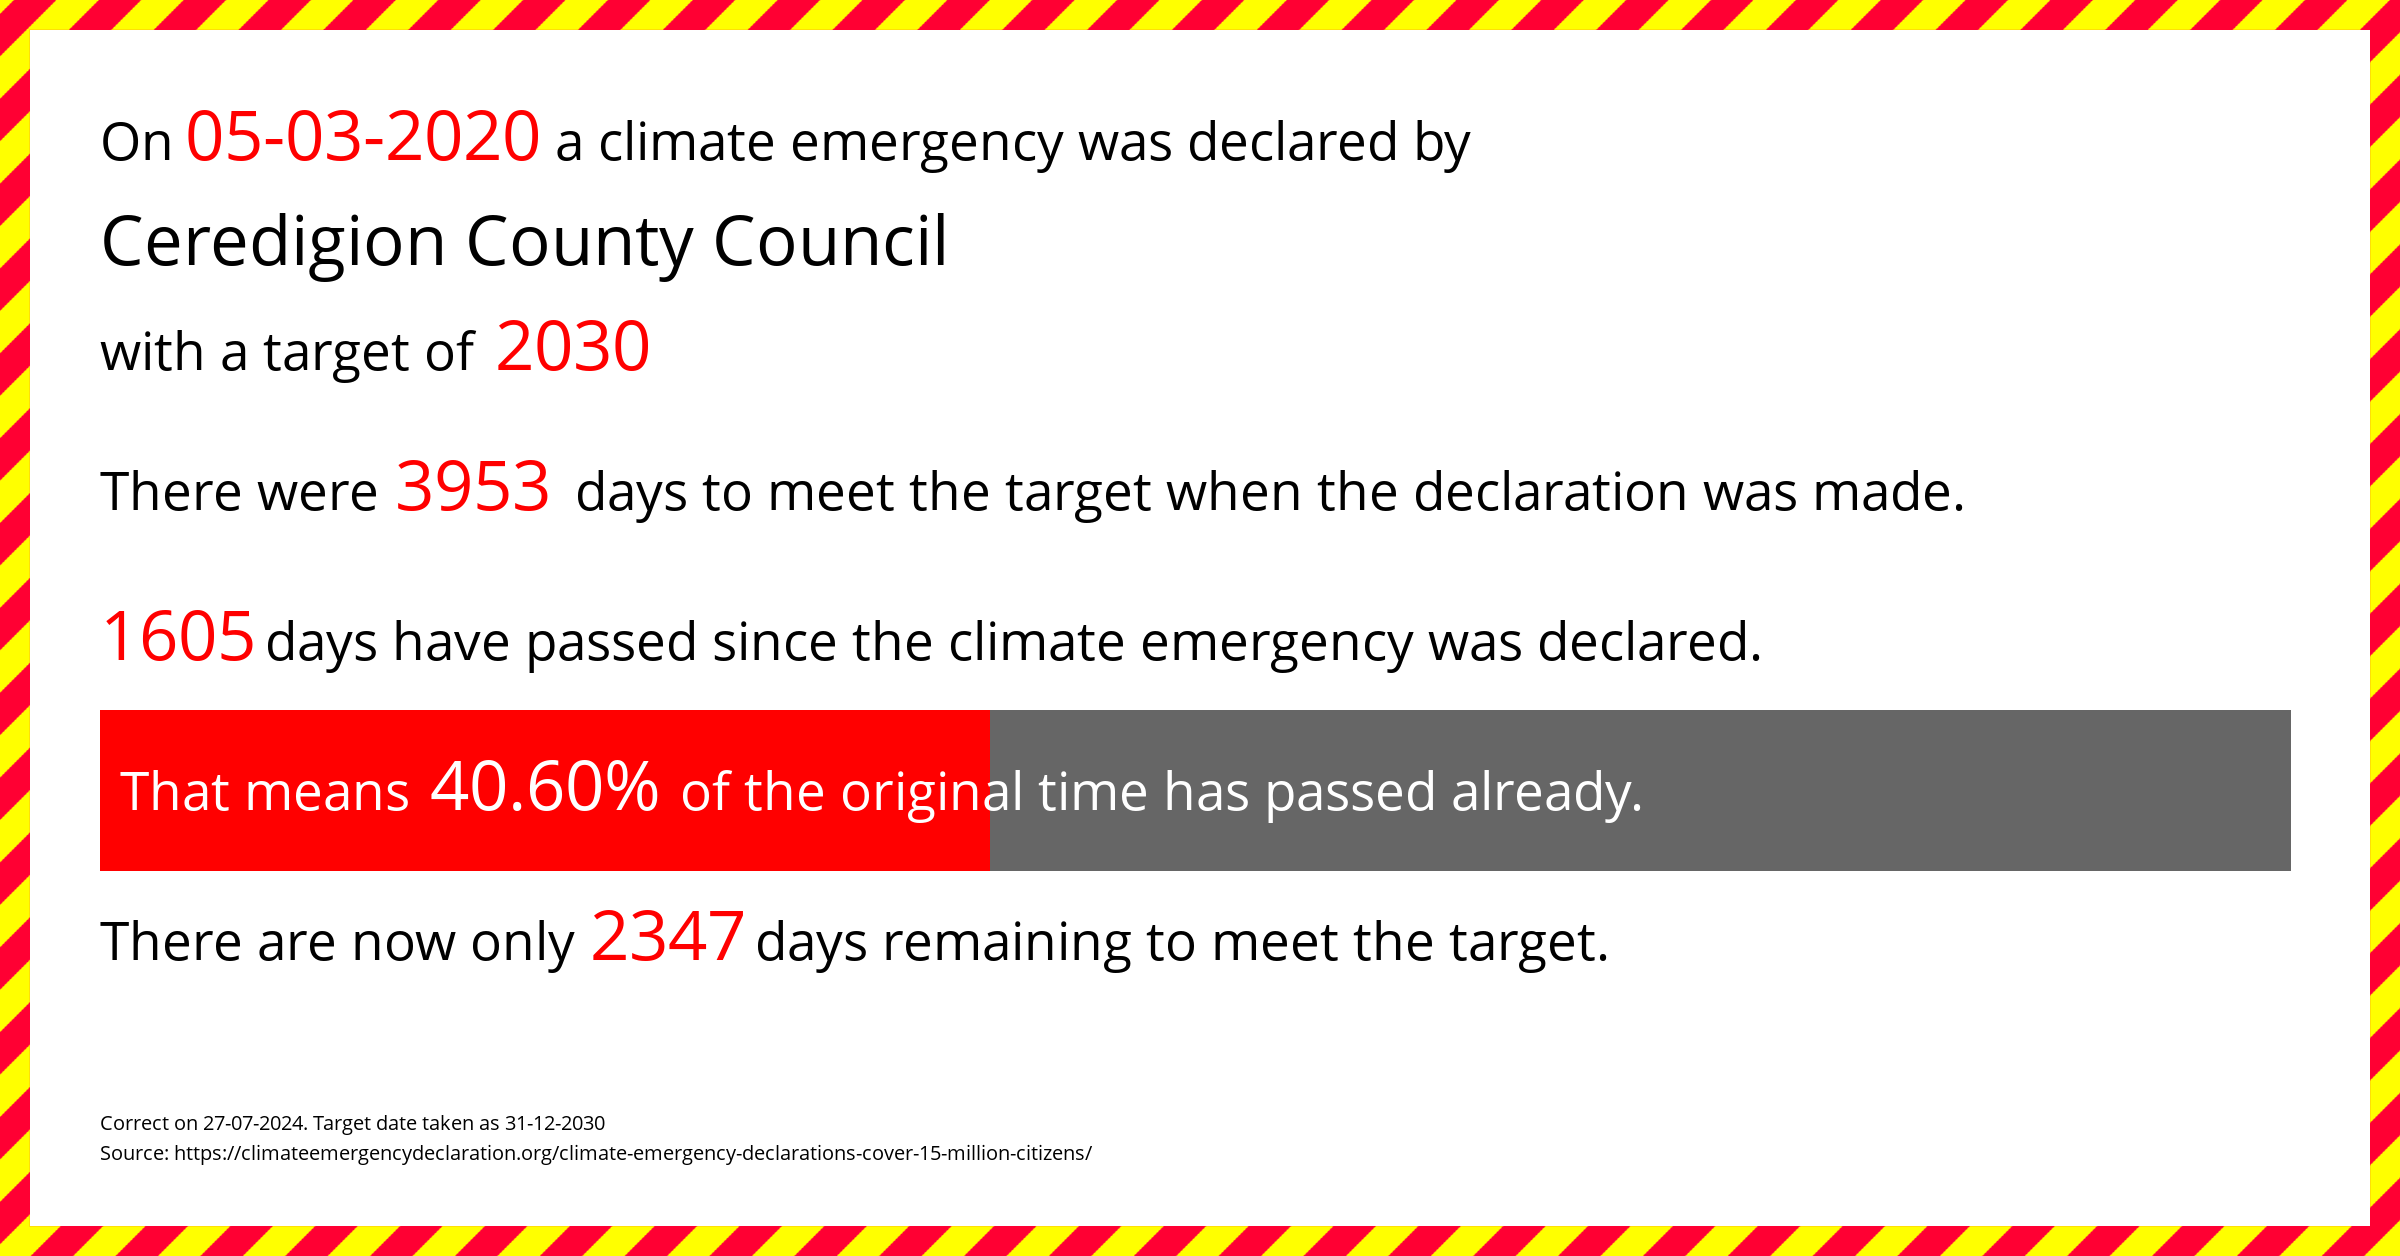 Ceredigion County Council declared a Climate emergency on Thursday 5th March 2020, with a target of 2030.